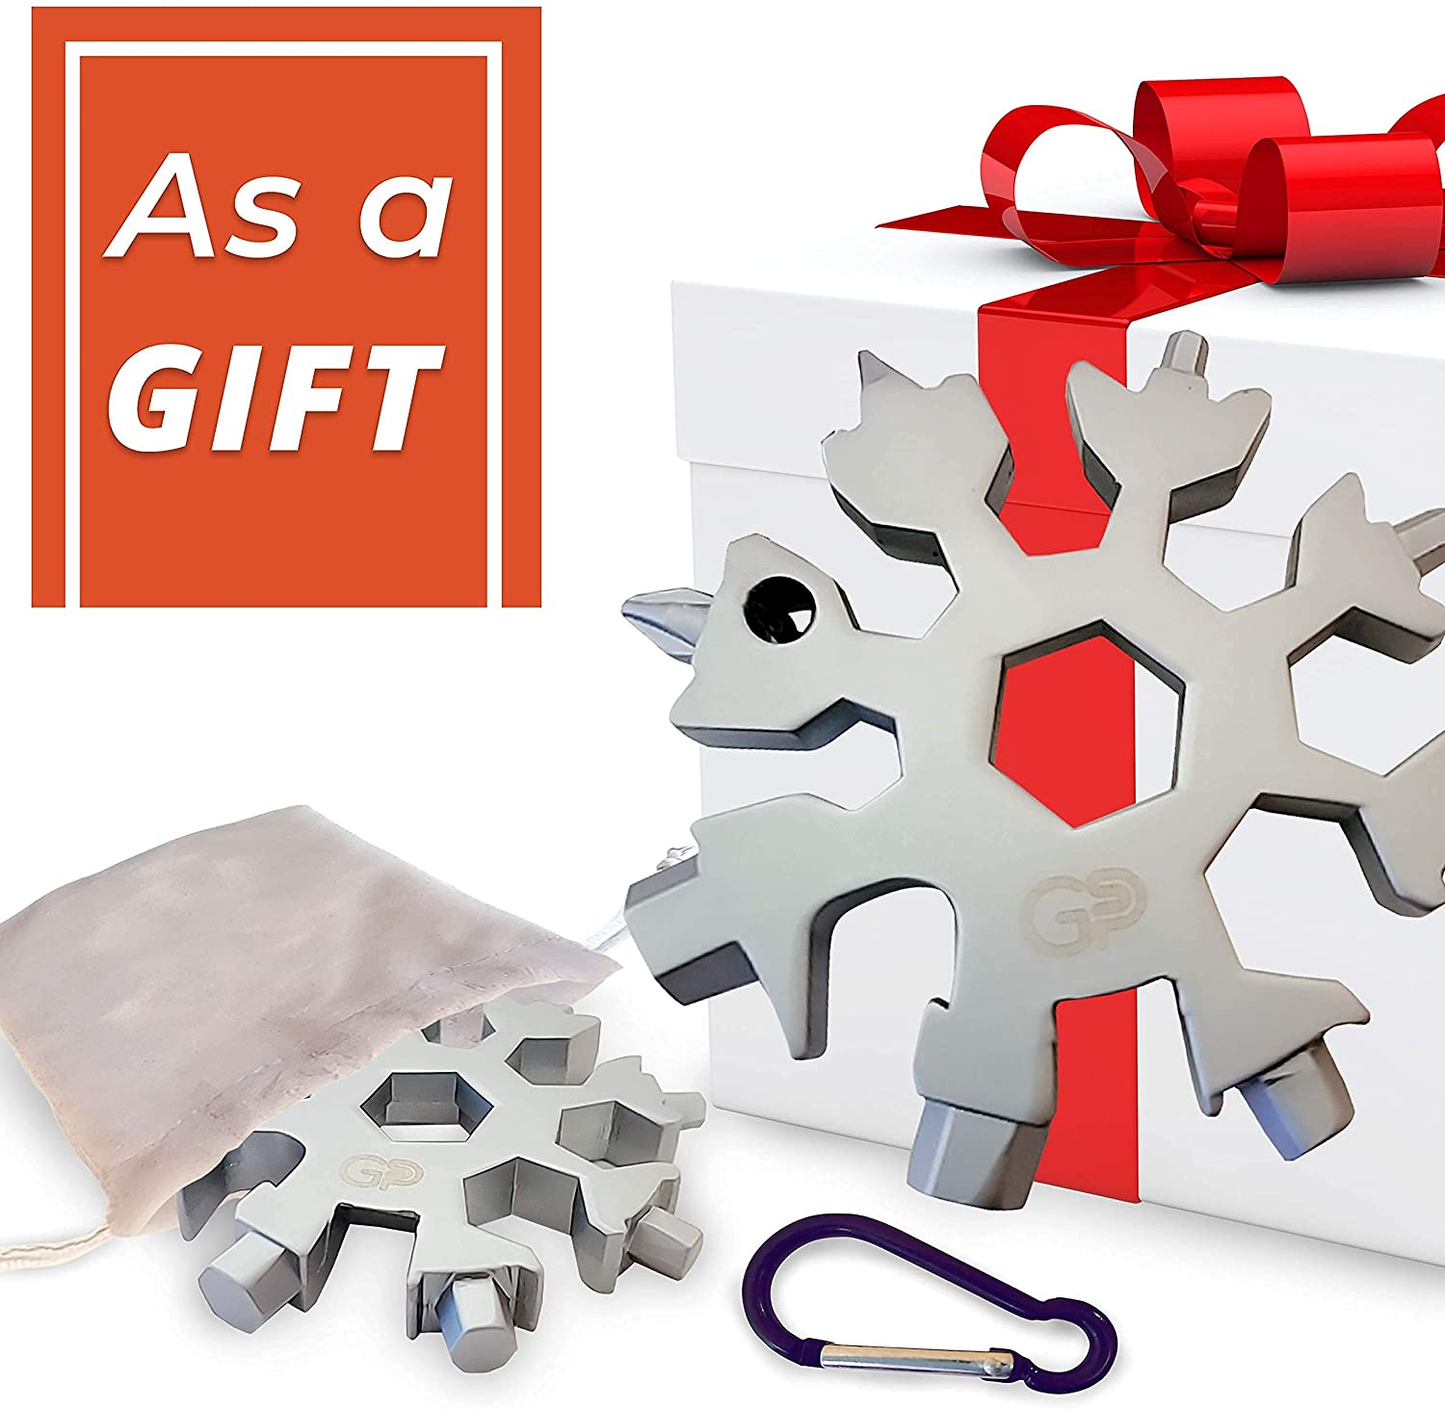 18-In-1 Snowflake Multi Tool, Stainless Steel Snowflake,Portable Metal Fidget Spinner Multi-Tool for Outdoor Camping & Christmas Gift.